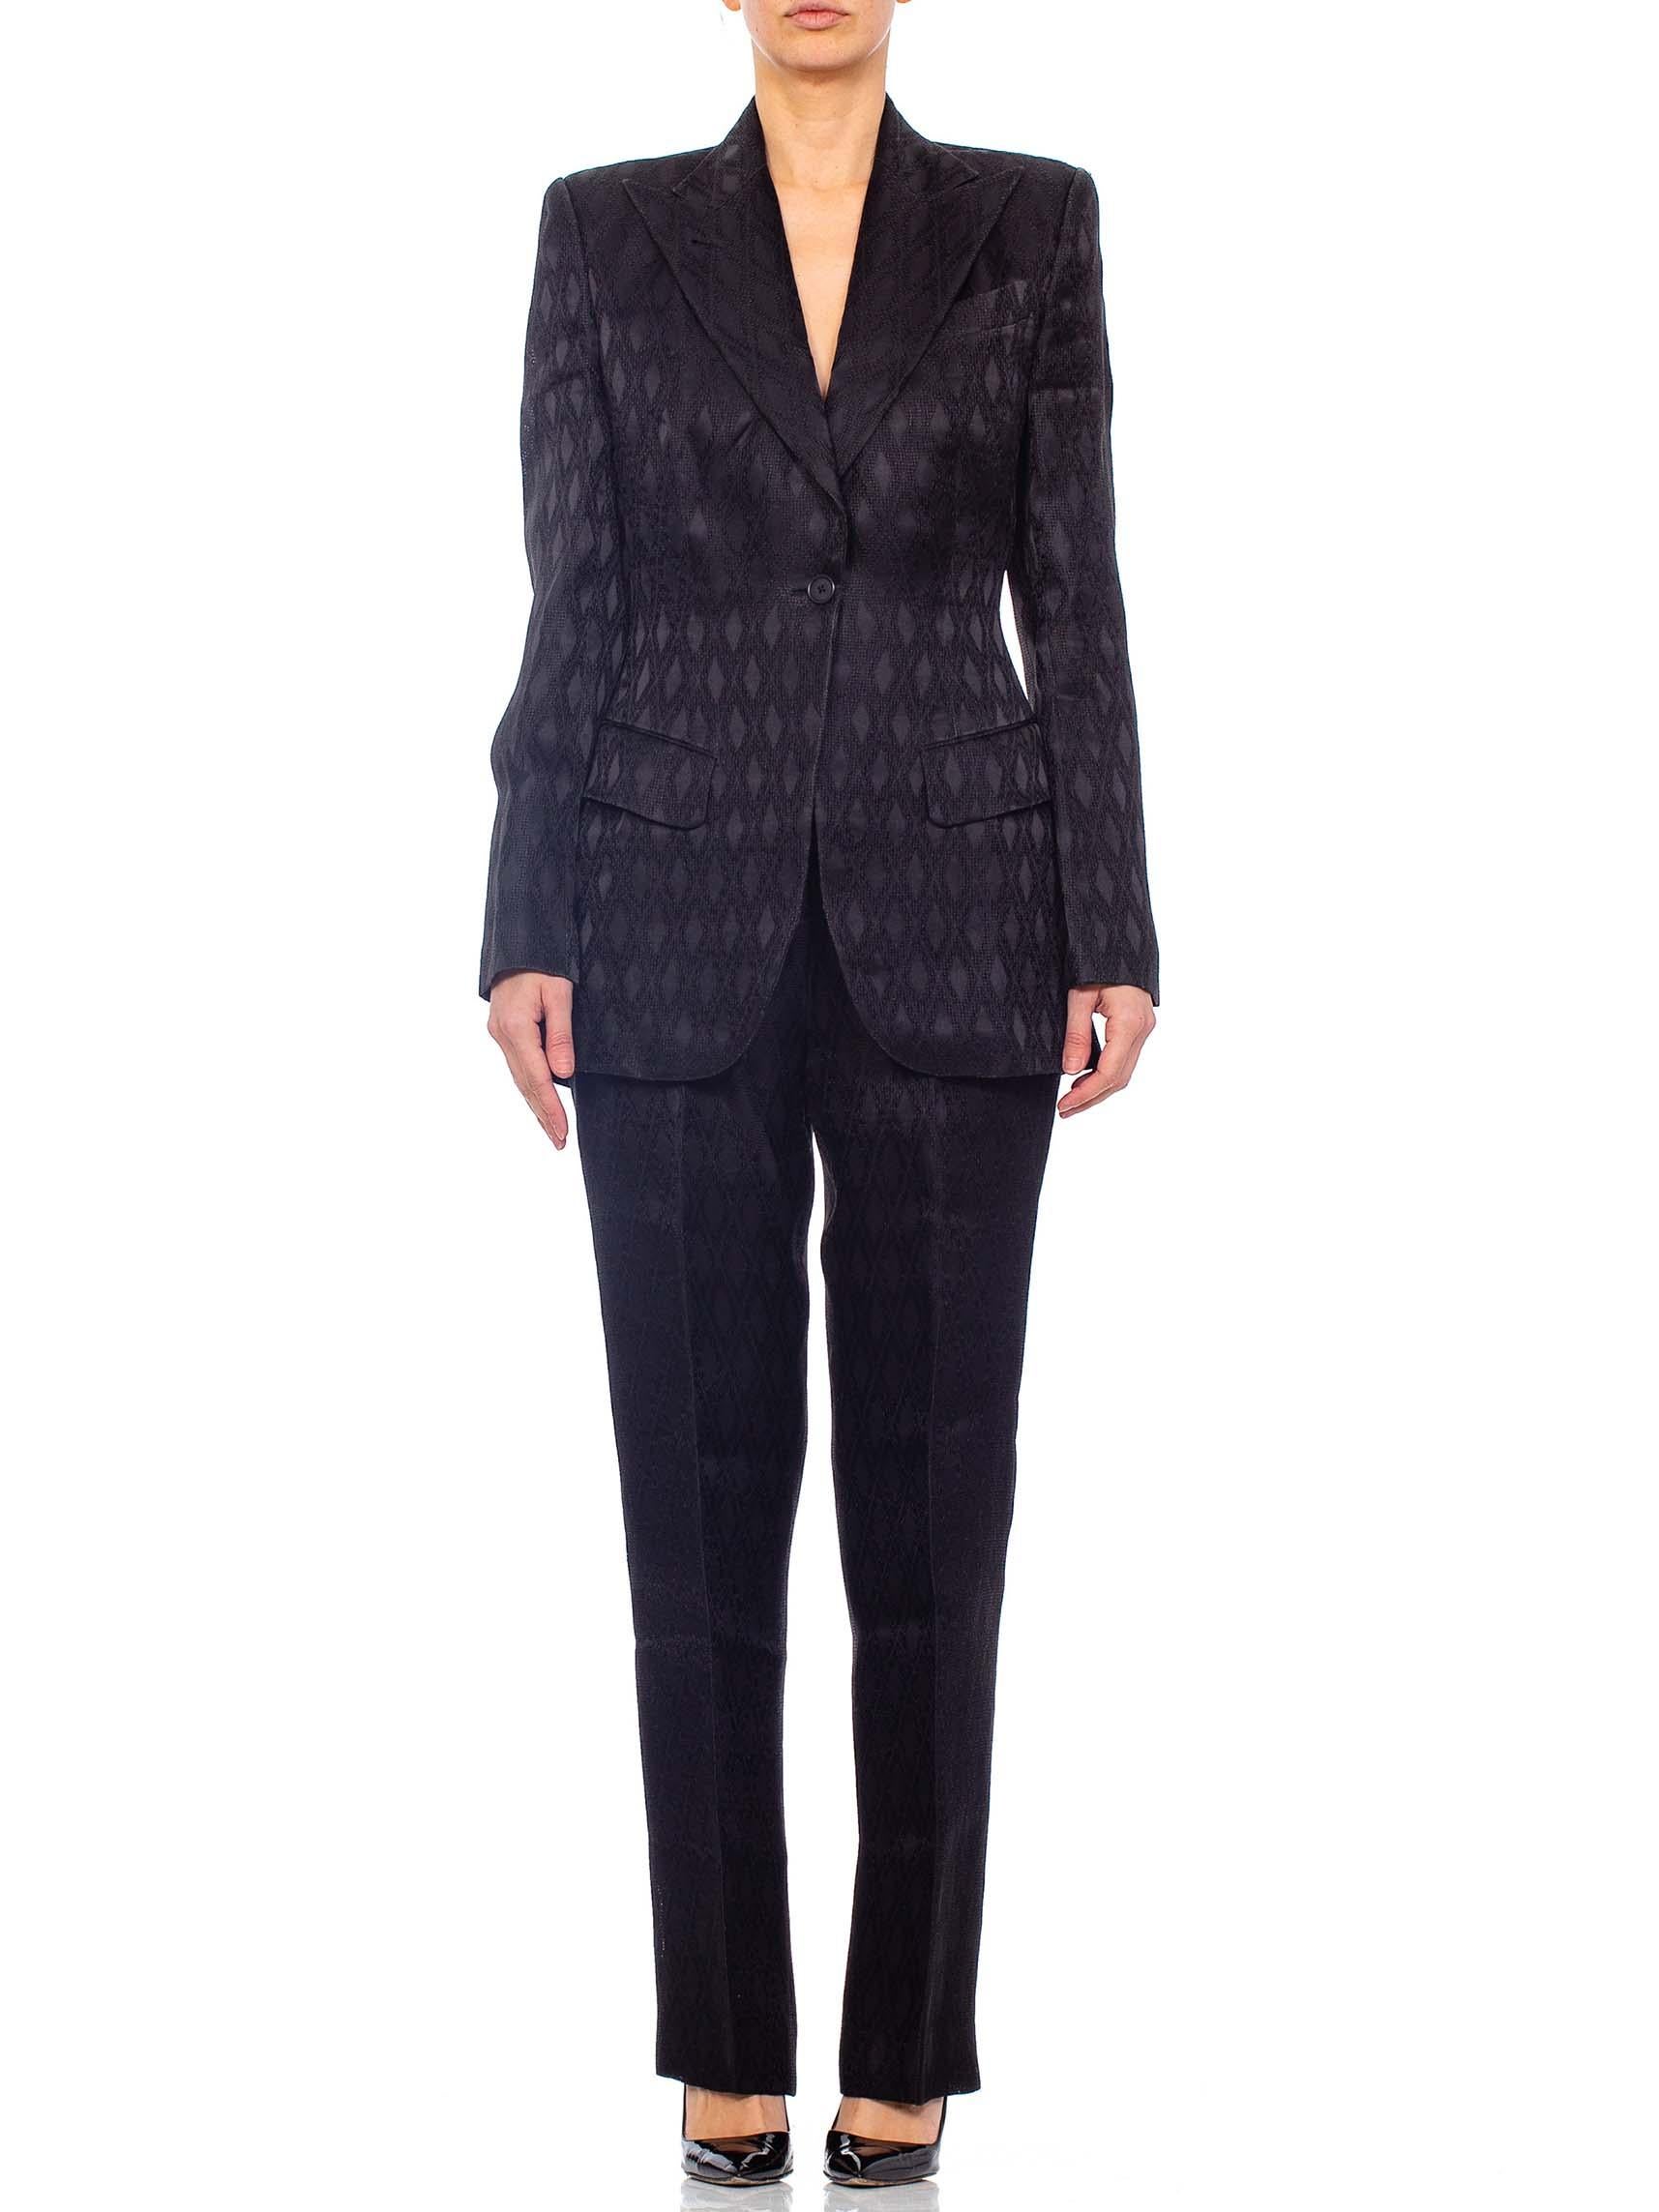 1990'S RICHARD TYLER Black Silk Couture Peak Lapel Pant Suit In Excellent Condition For Sale In New York, NY